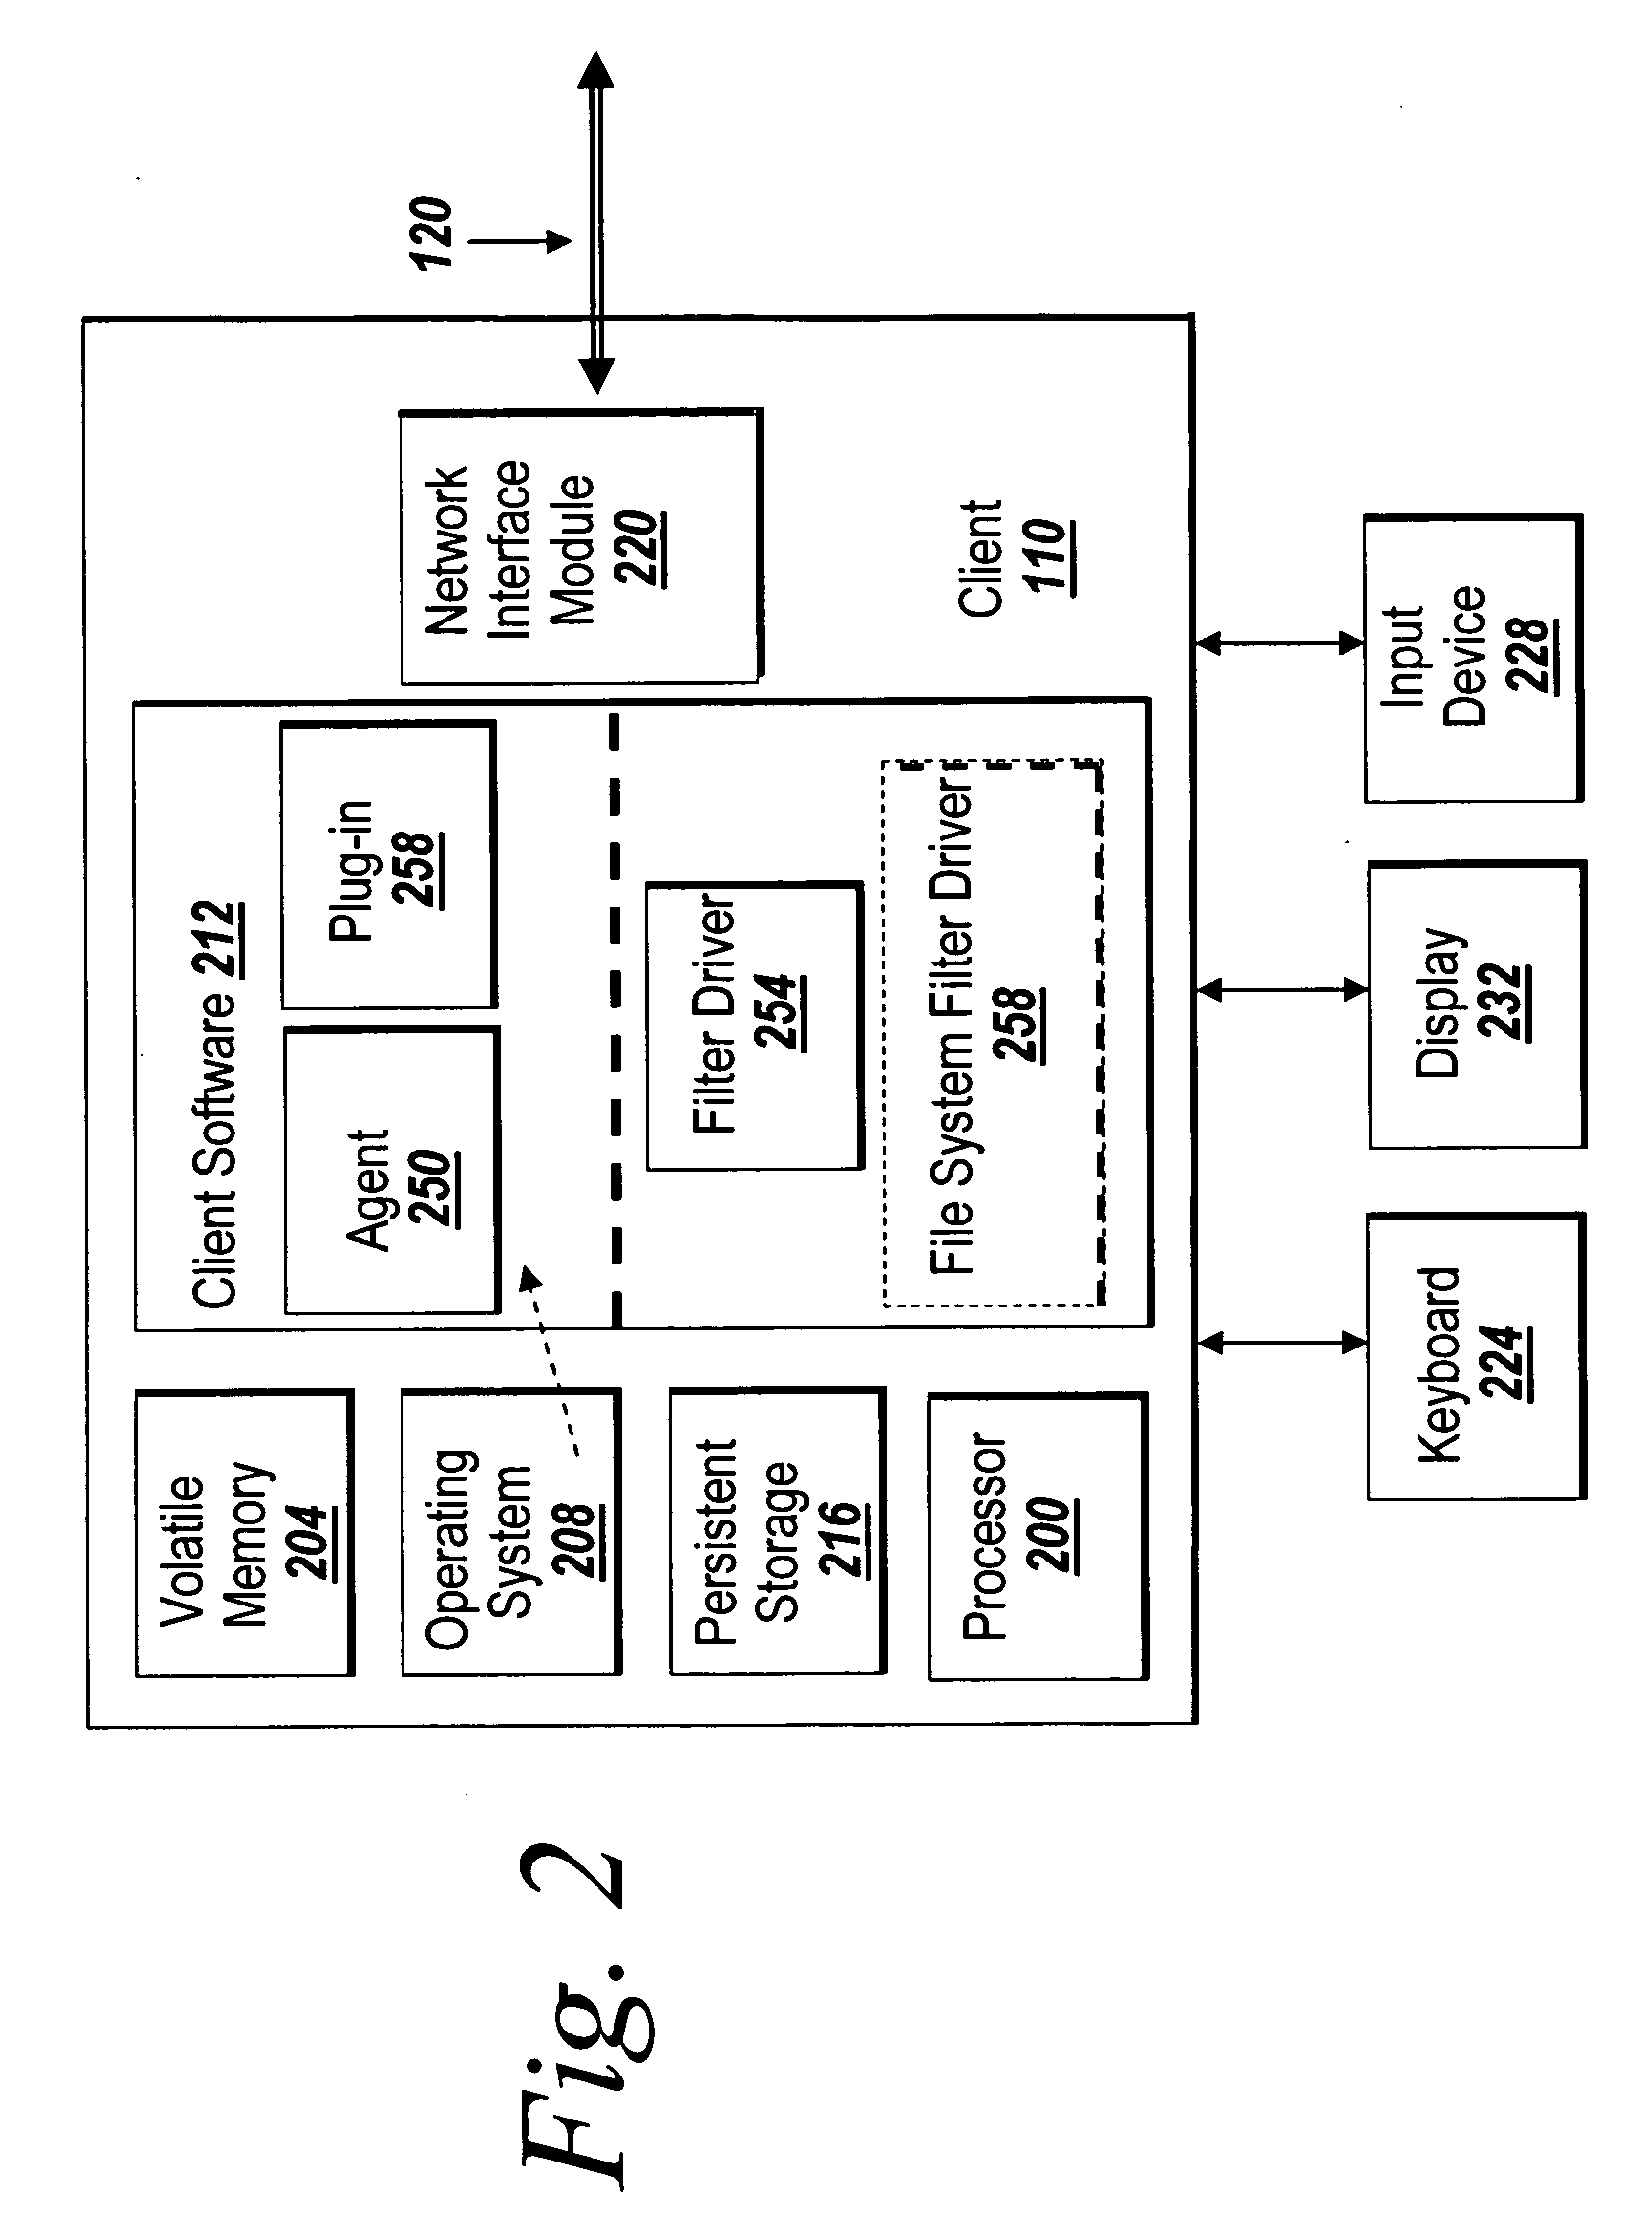 Systems and methods for searching digital assets using virtual folders having labels based on taxonomy tags